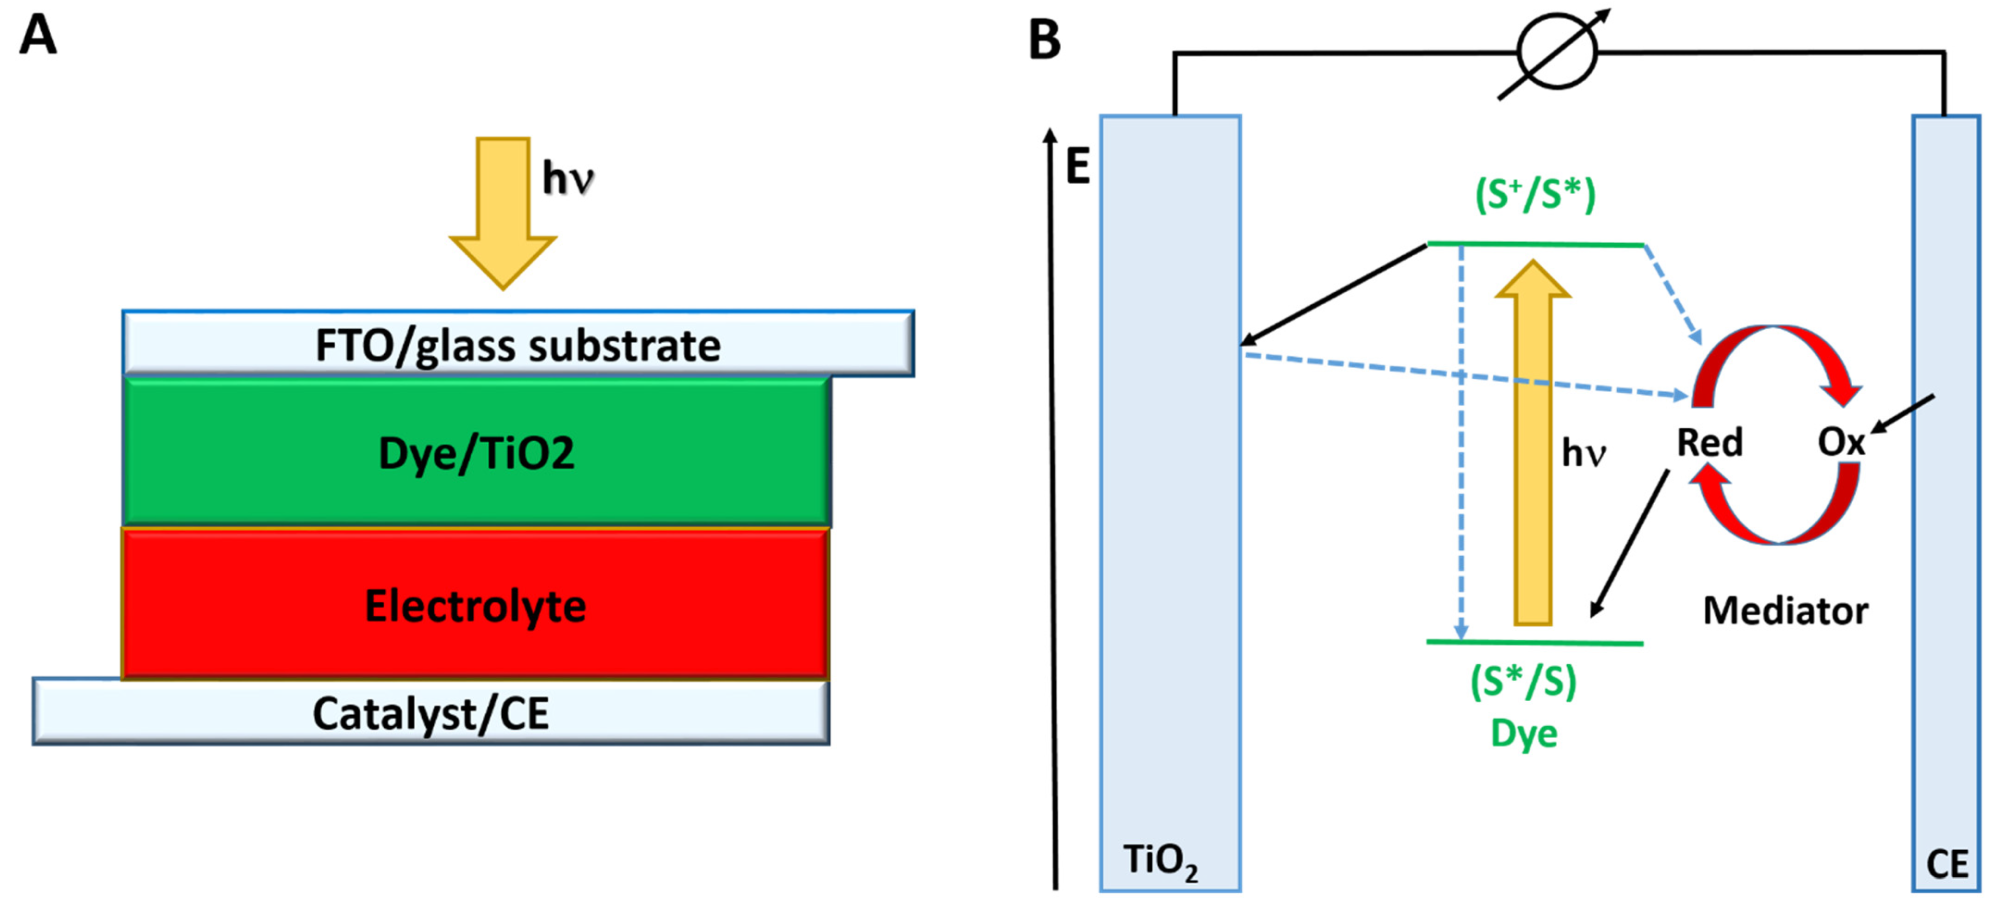 (A) The schematic structure and (B) main processes and principles of operation of the dye-sensitized solar cell.